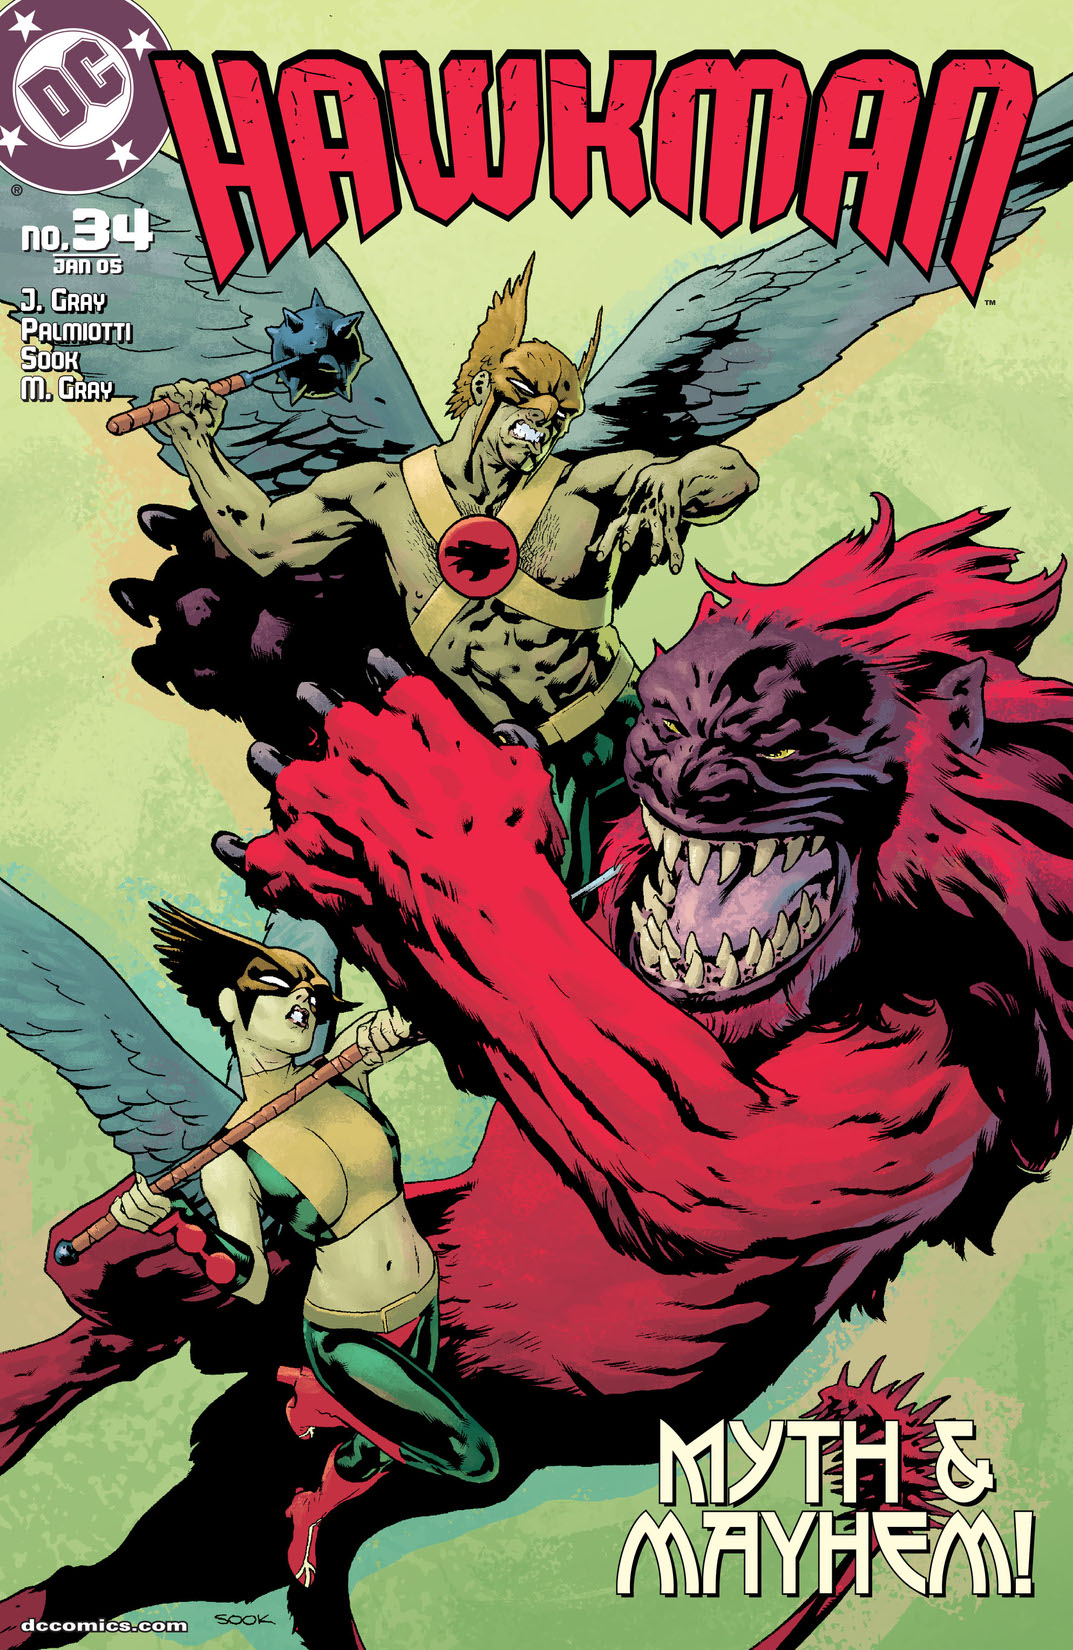 Hawkman (2002-) #34 preview images